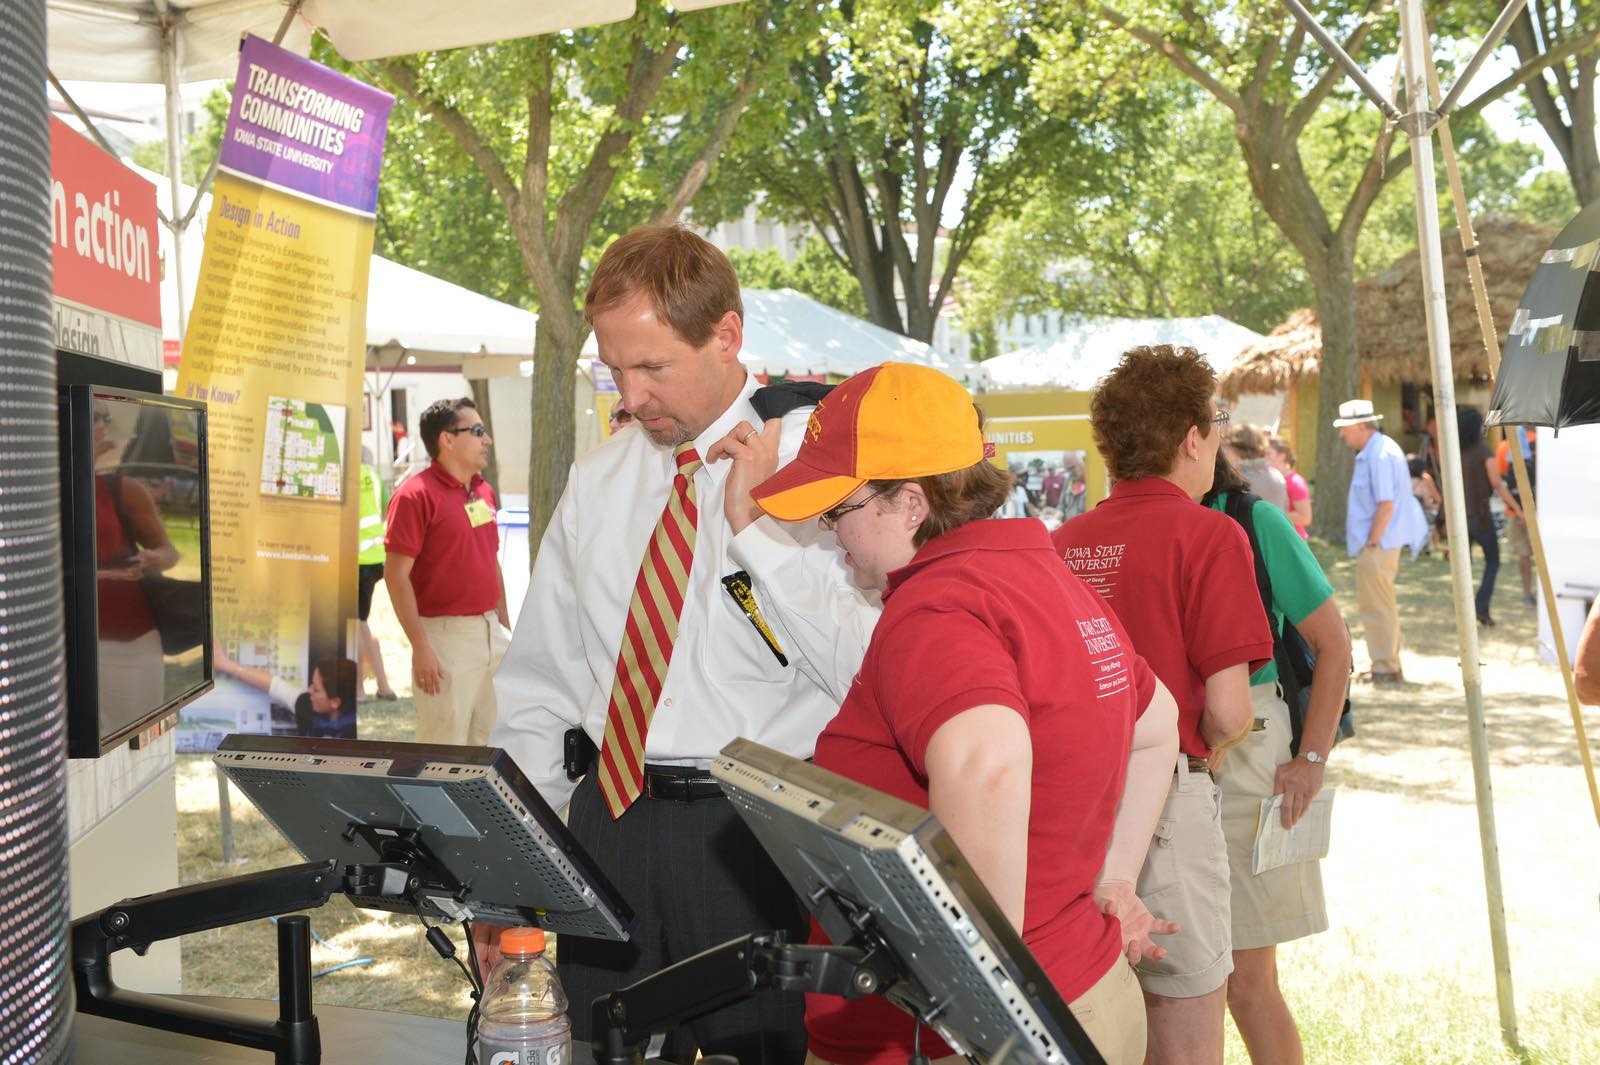 Provost Wickert looking at a display booth